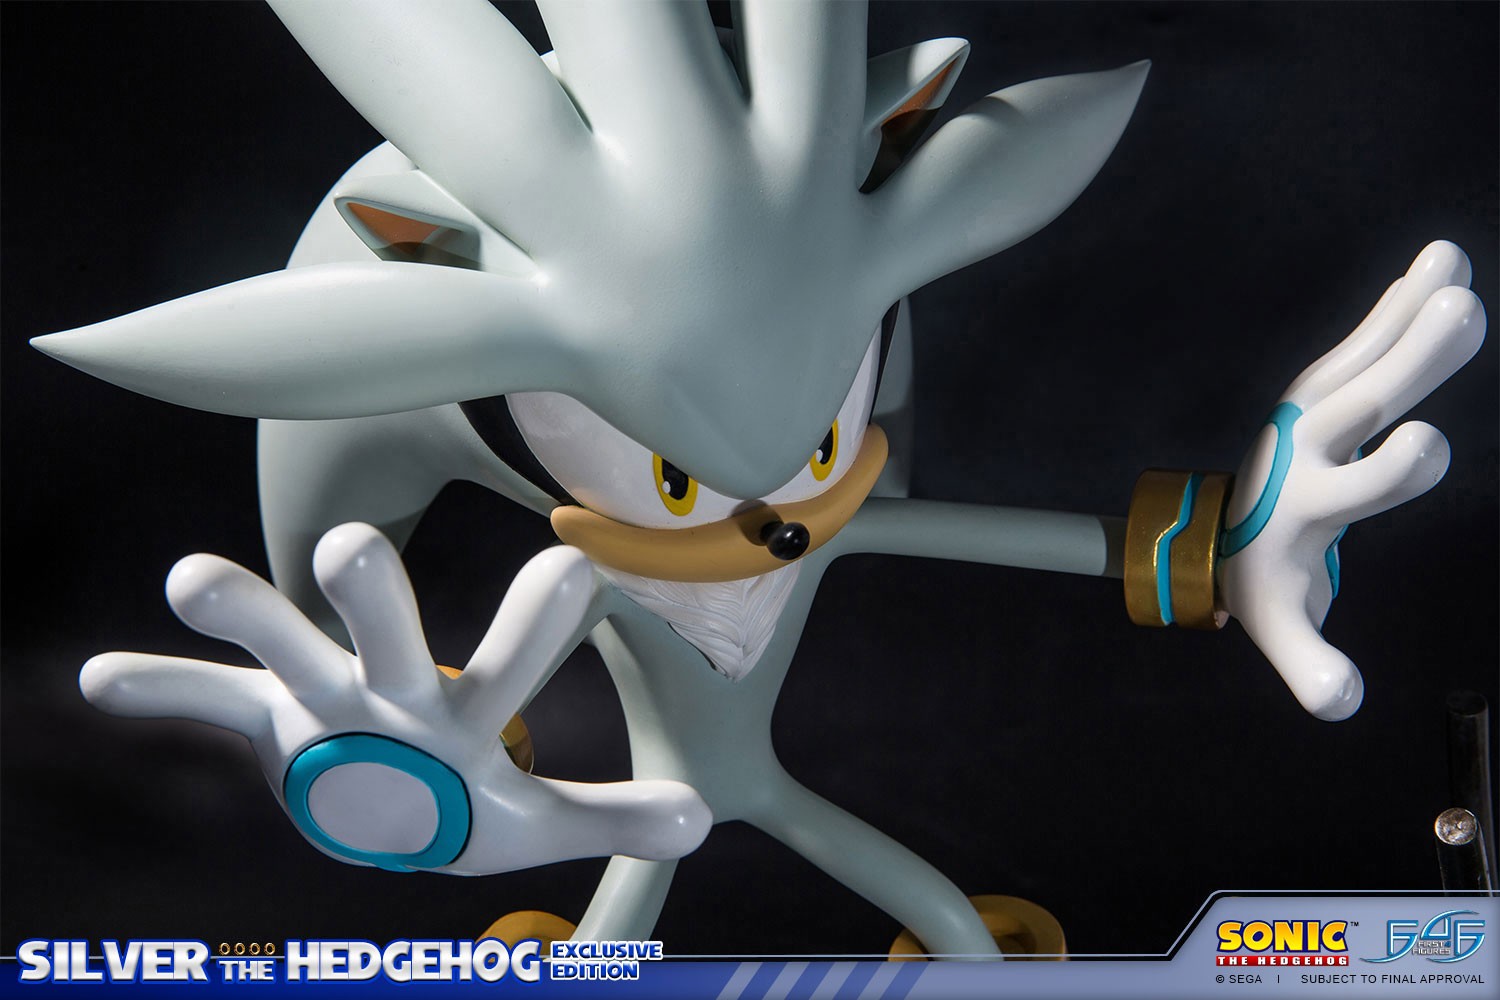 Silver the Hedgehog (Exclusive)1500 x 1000